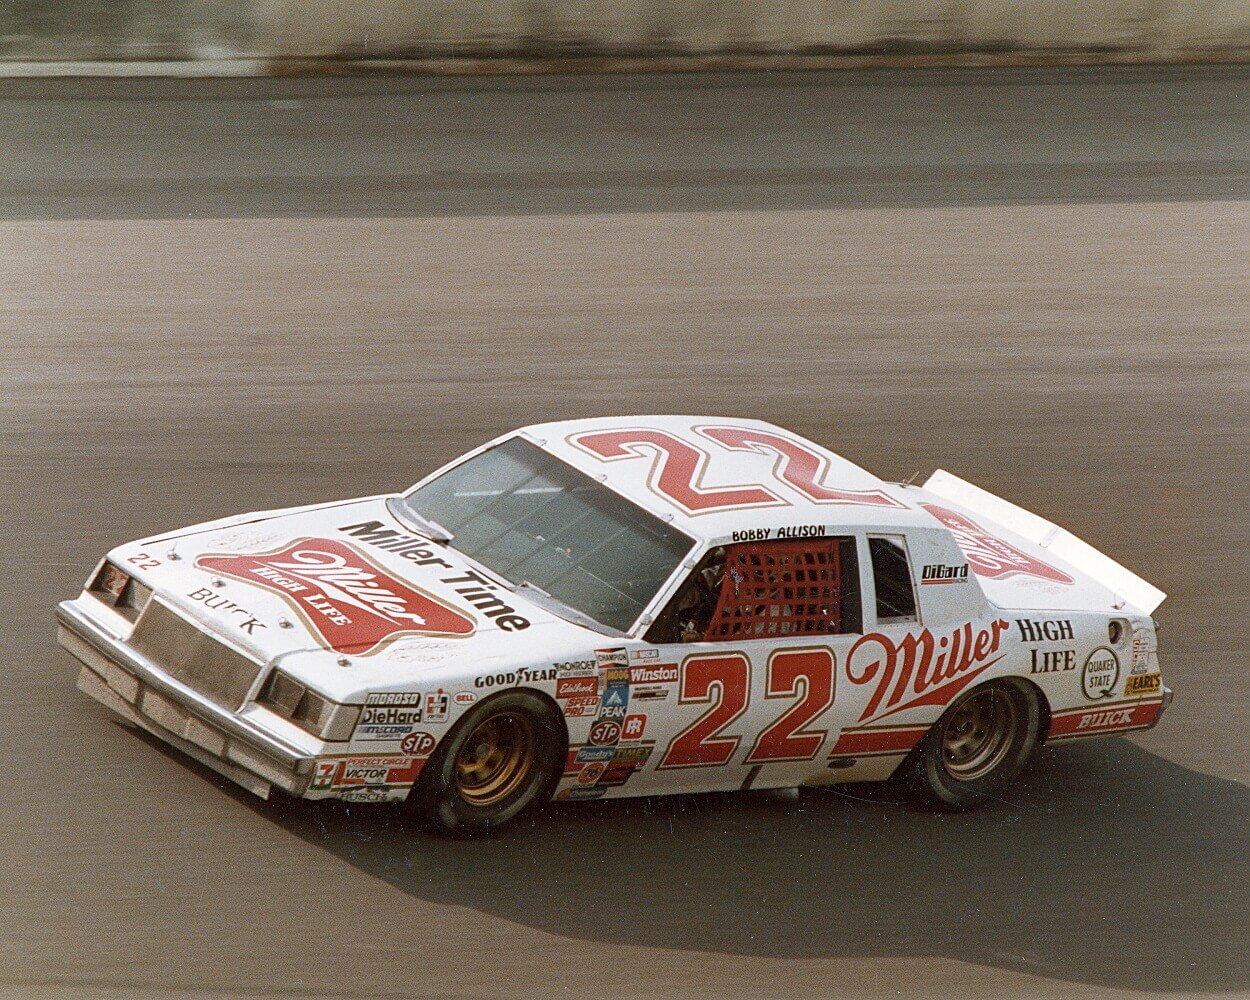 On his way to his only NASCAR Cup championship in 1983, Bobby Allison drove the DiGard Racing Miller High Life Buick to six victories and an incredible 25 top 10 finishes in 30 races